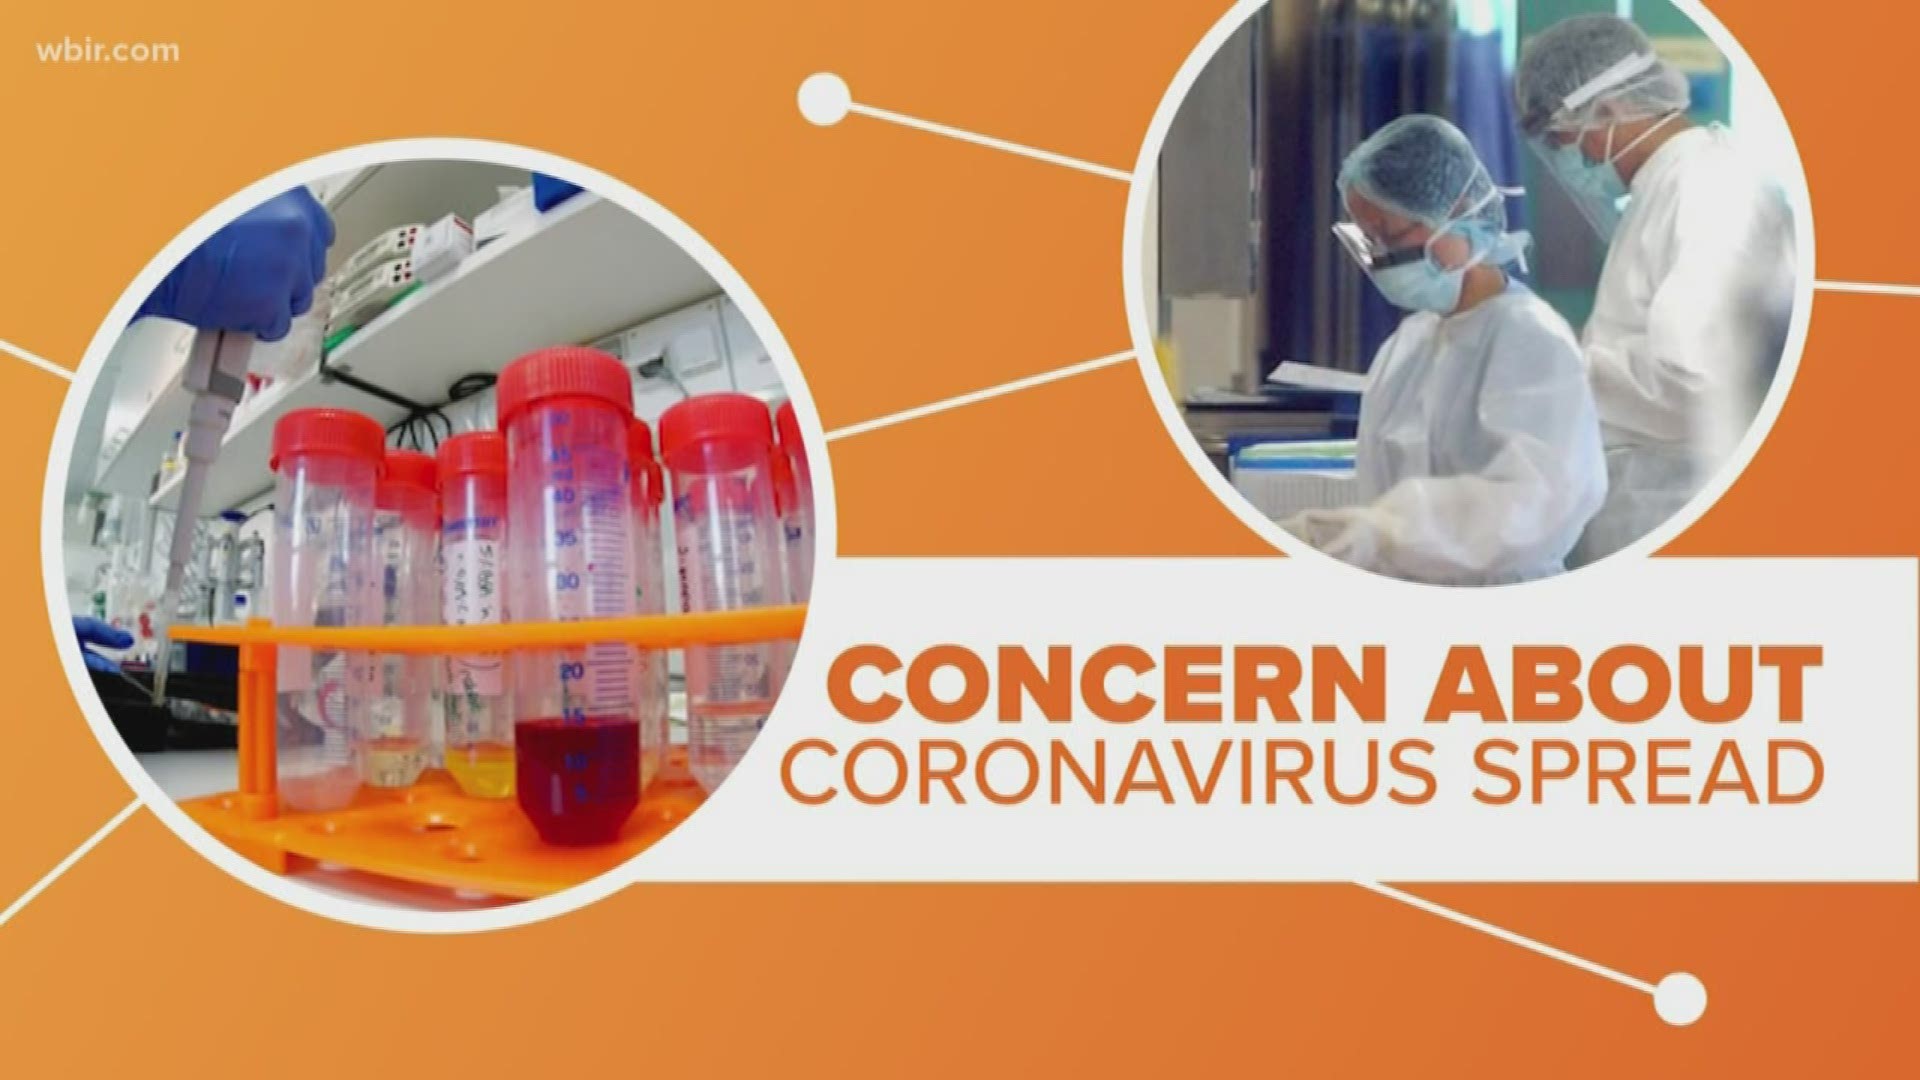 As the coronavirus continues to spread, many fear that the outbreak is bigger than we think.